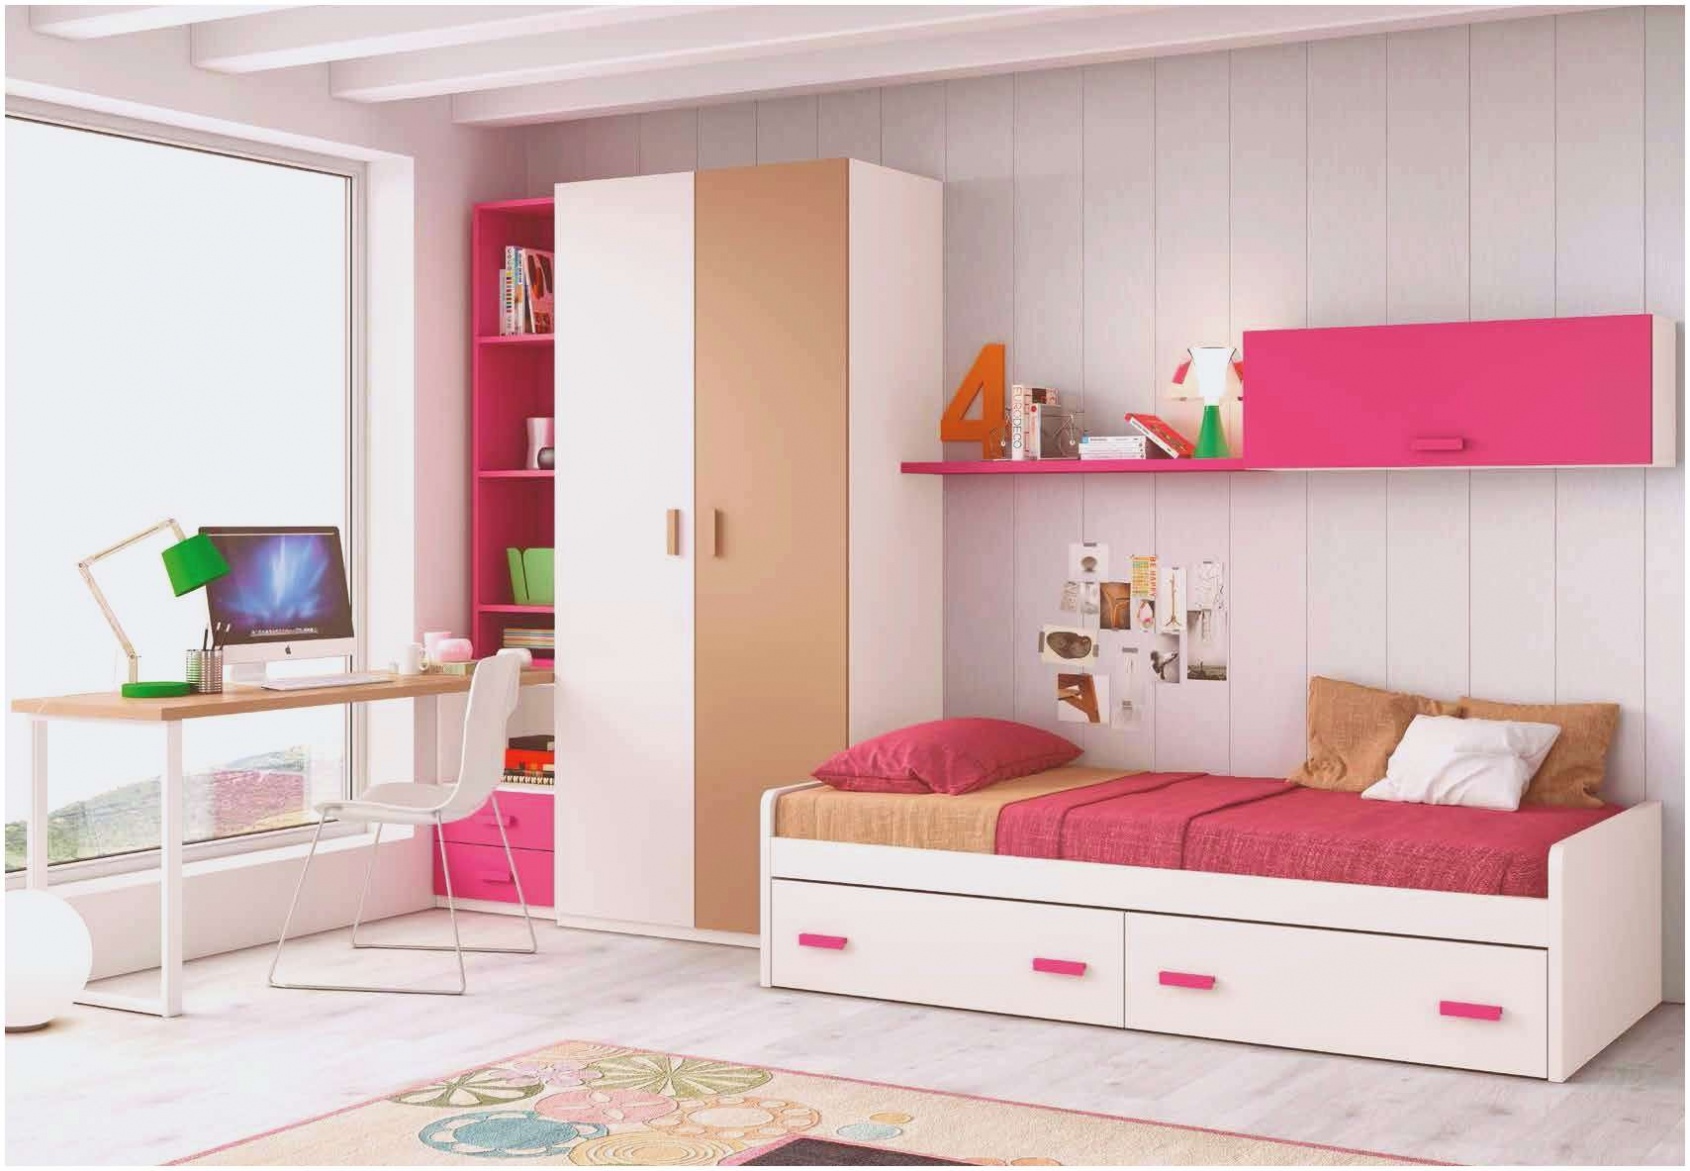 beau chaise connectee chambre bebe cdiscount new chambre b deco 17 idee chambre d ado fille of idee chambre d ado fille